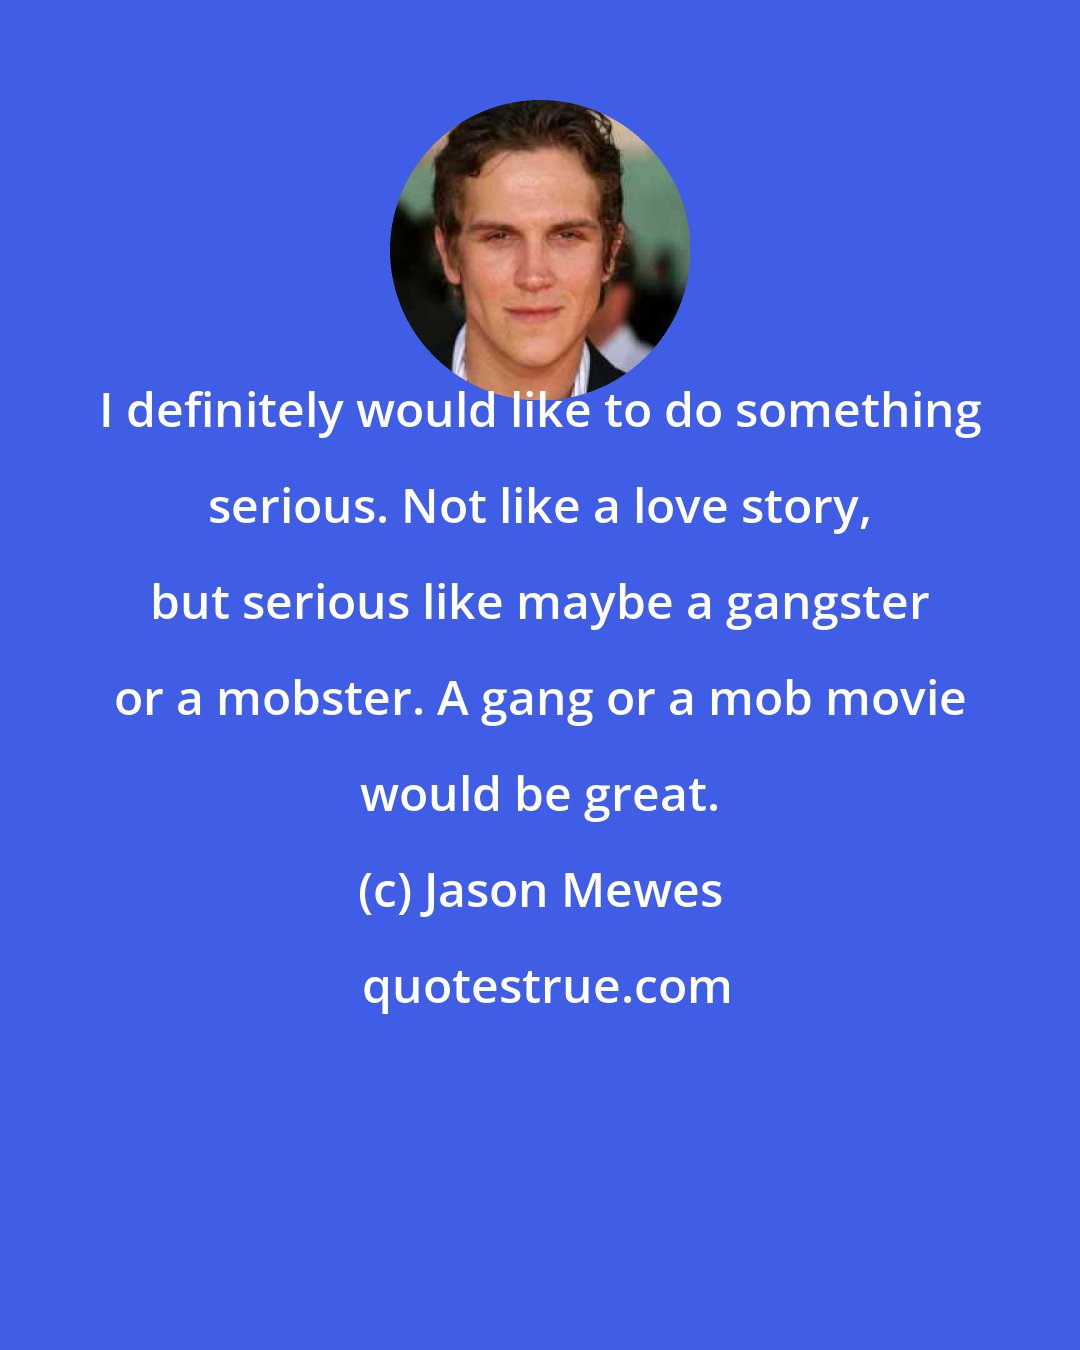 Jason Mewes: I definitely would like to do something serious. Not like a love story, but serious like maybe a gangster or a mobster. A gang or a mob movie would be great.